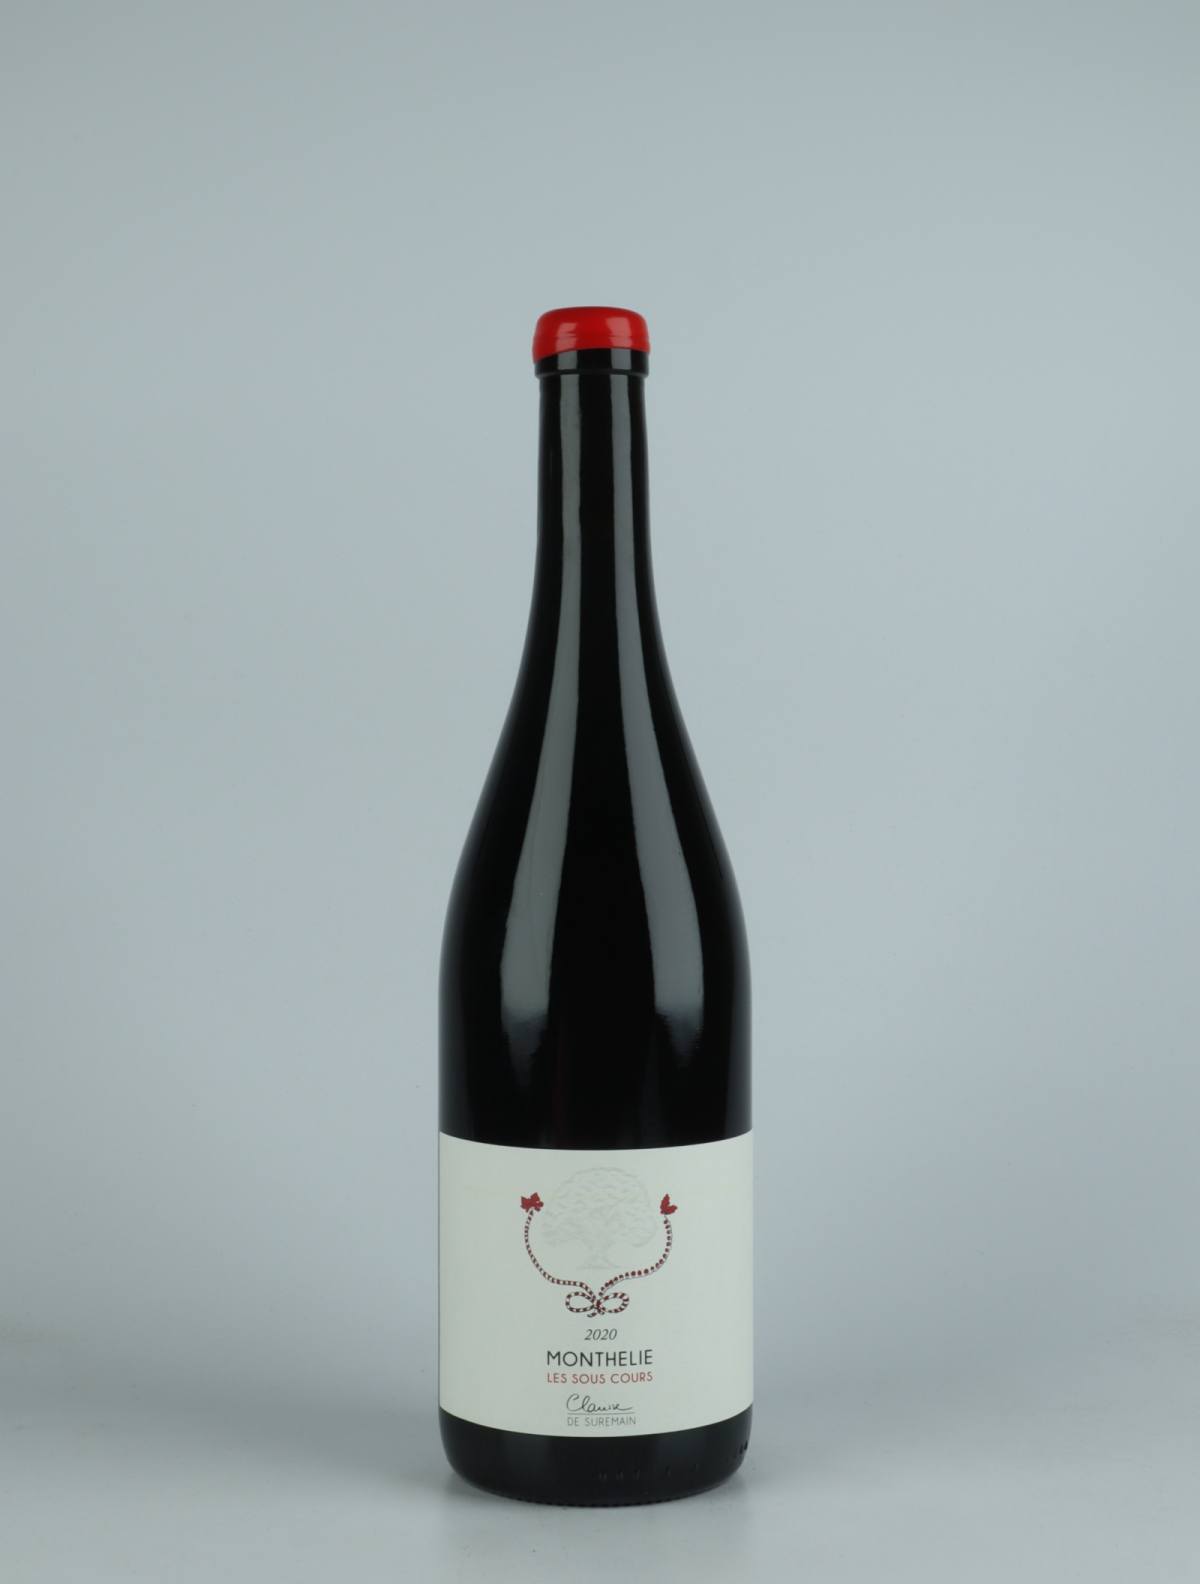 A bottle 2020 Monthelie Red wine from Clarisse de Suremain, Burgundy in France